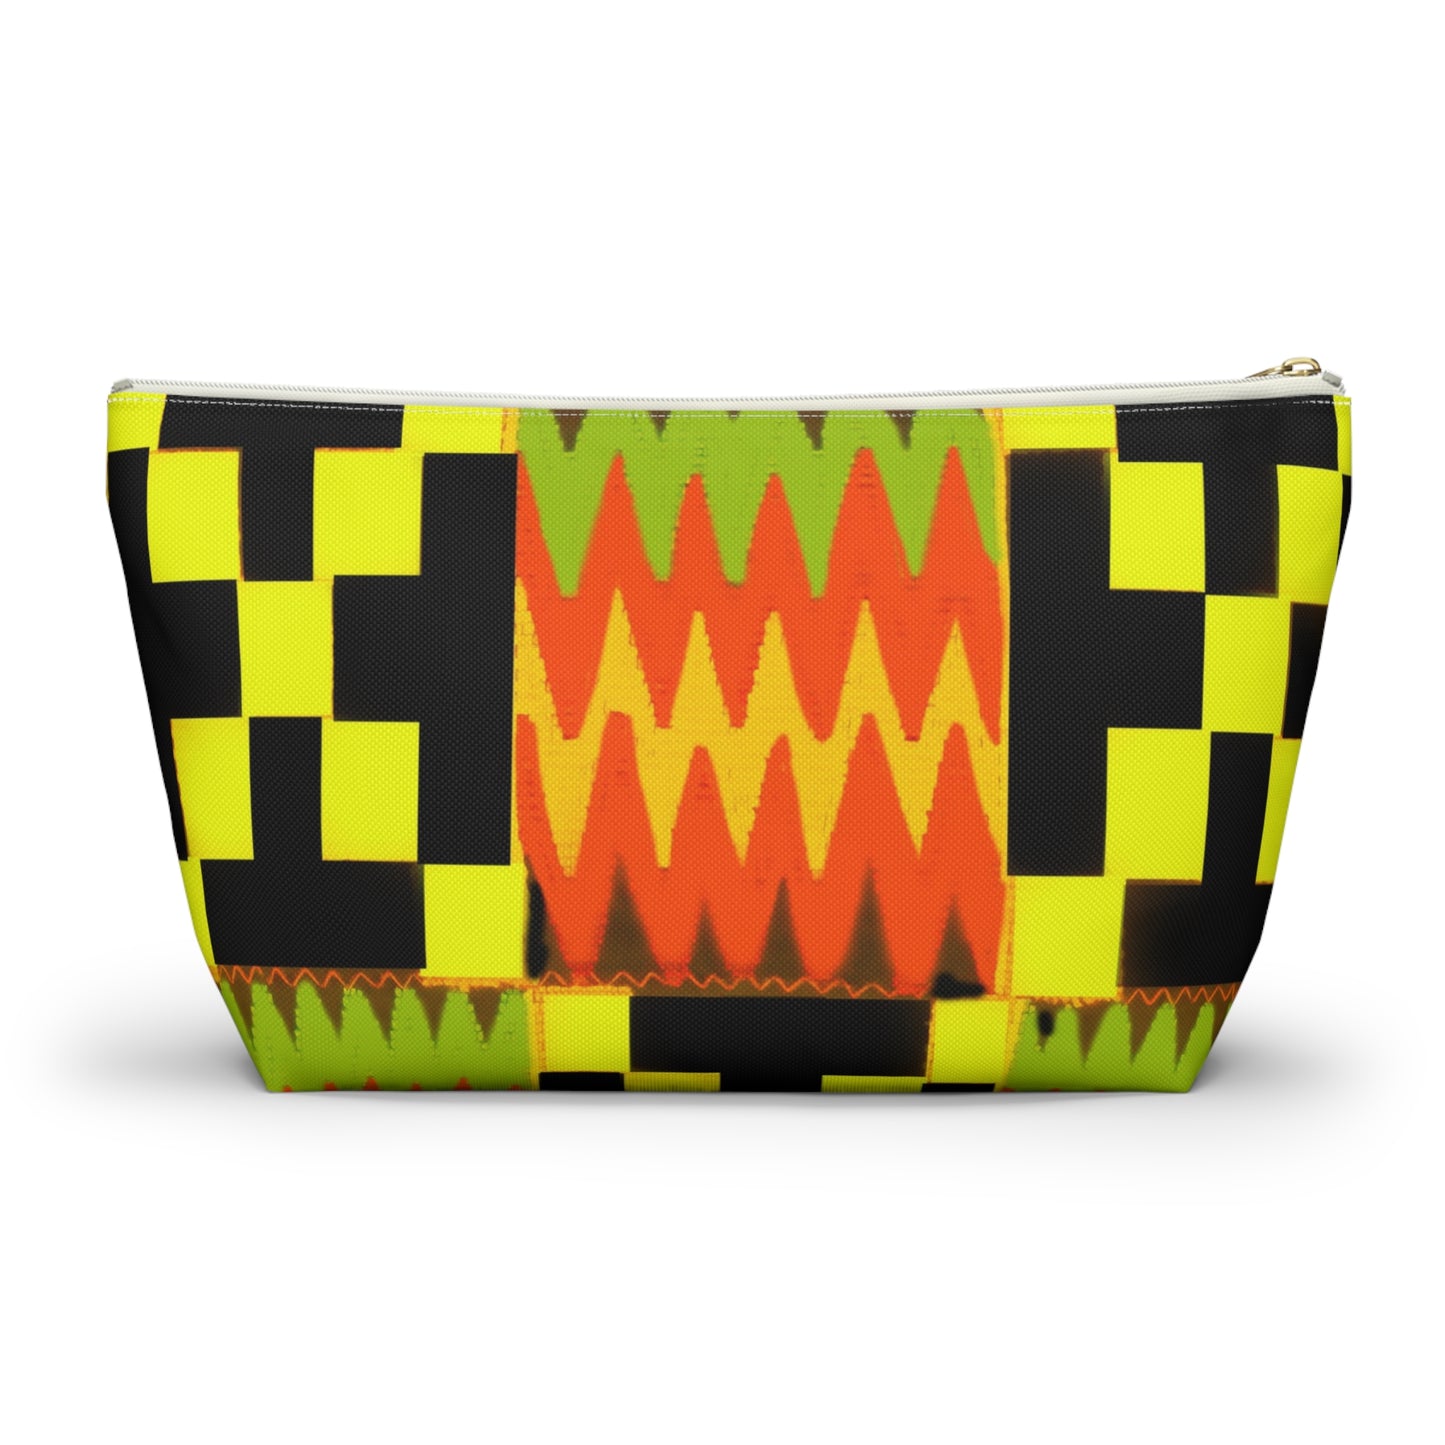 Kente Cloth Accessory Pouch: Style, Heritage, & Function